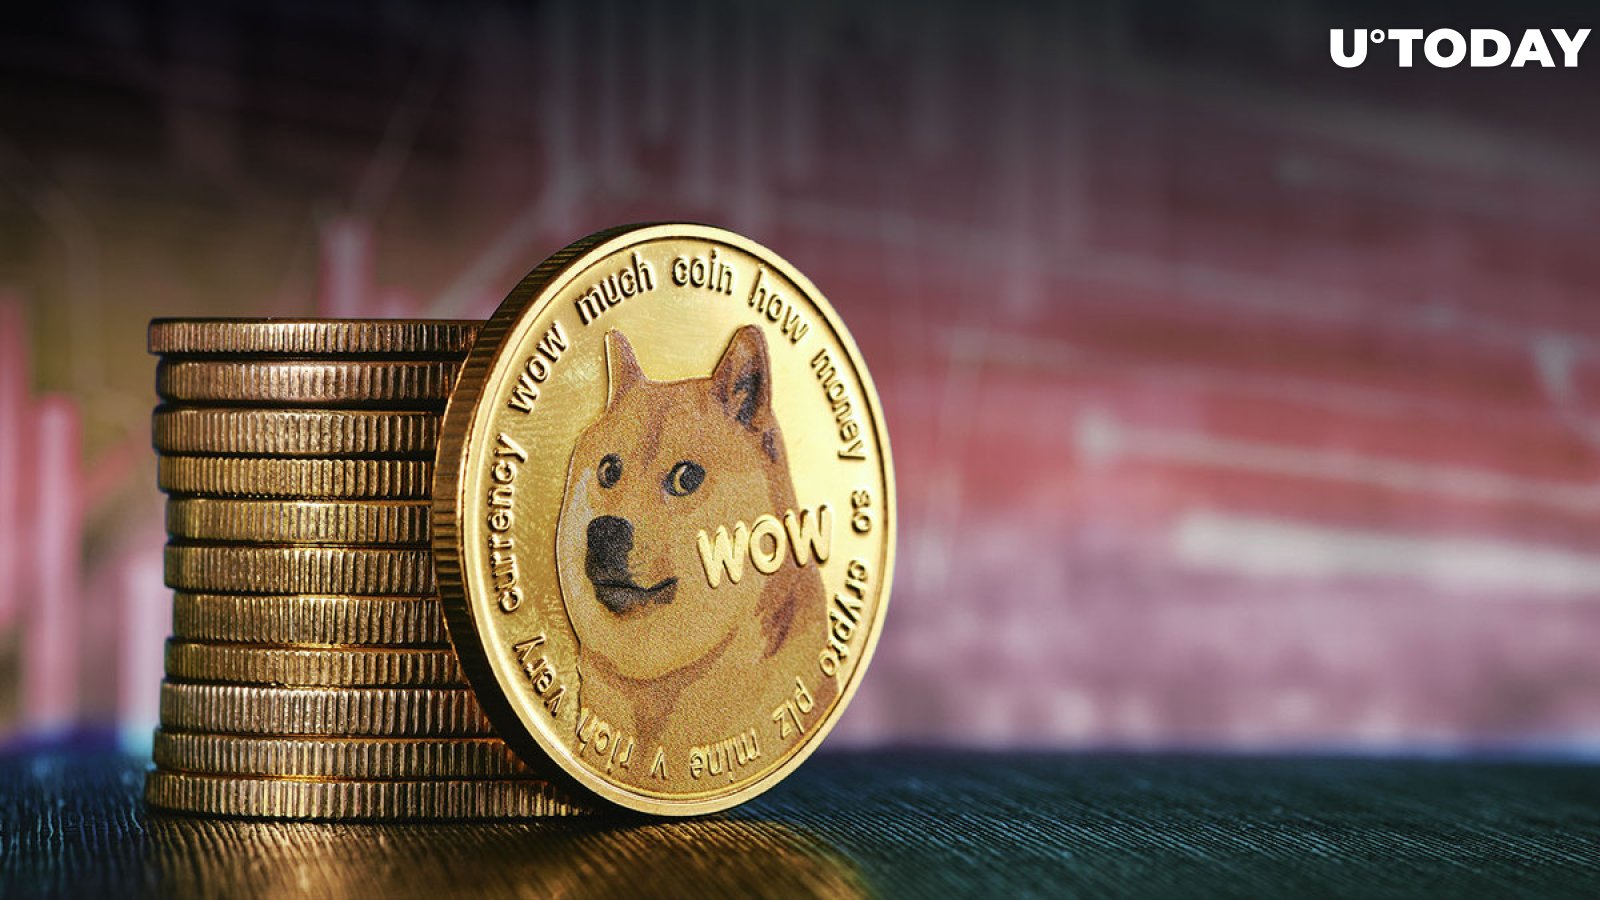 How to Sell Dogecoin (DOGE) for GBP in the UK